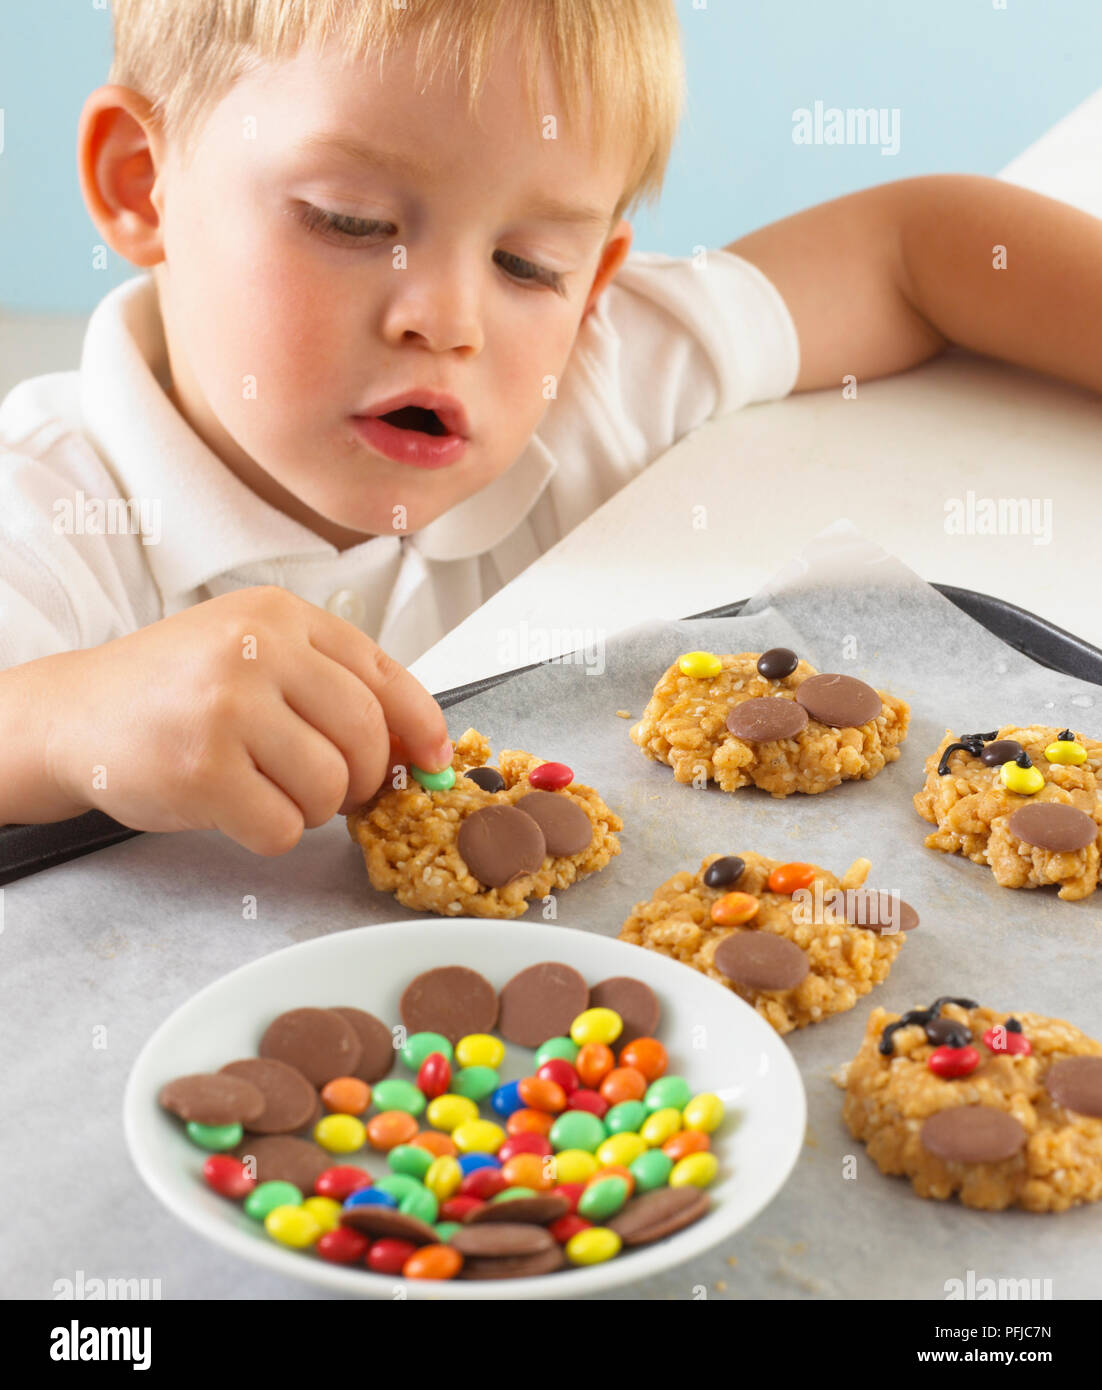 Boy decorating puffed rice and peanut cookies with coloured chocolates Stock Photo